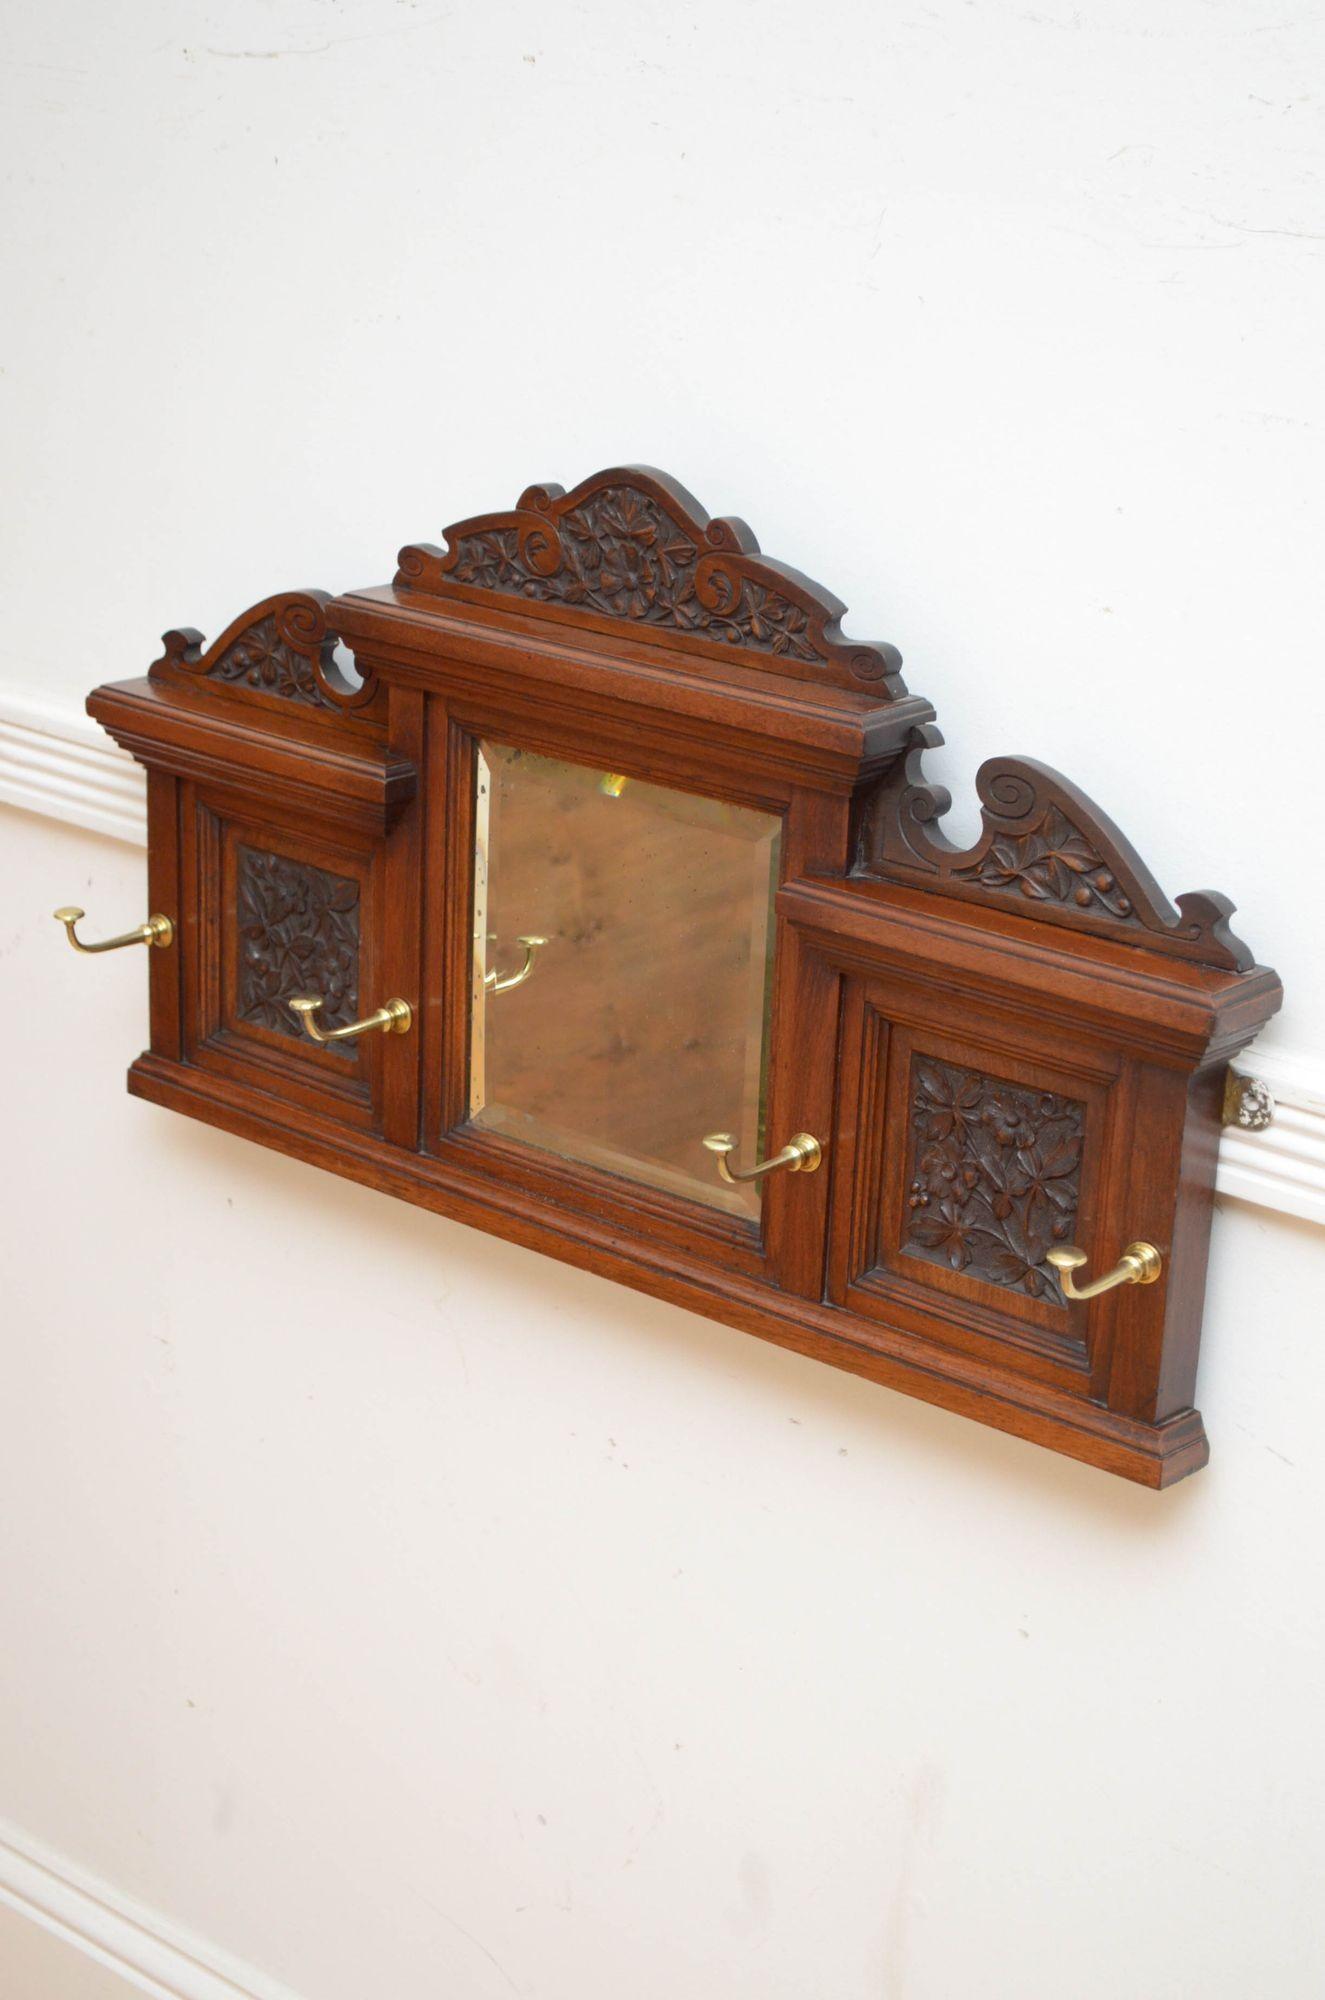 P0294 Stylish Edwardian coat rack in walnut, having finely carved triple upstand above original bevelled edge mirror flanked by decorative floral carved panels, all fitted with four projecting brass hooks. This antique coat rack retains its original